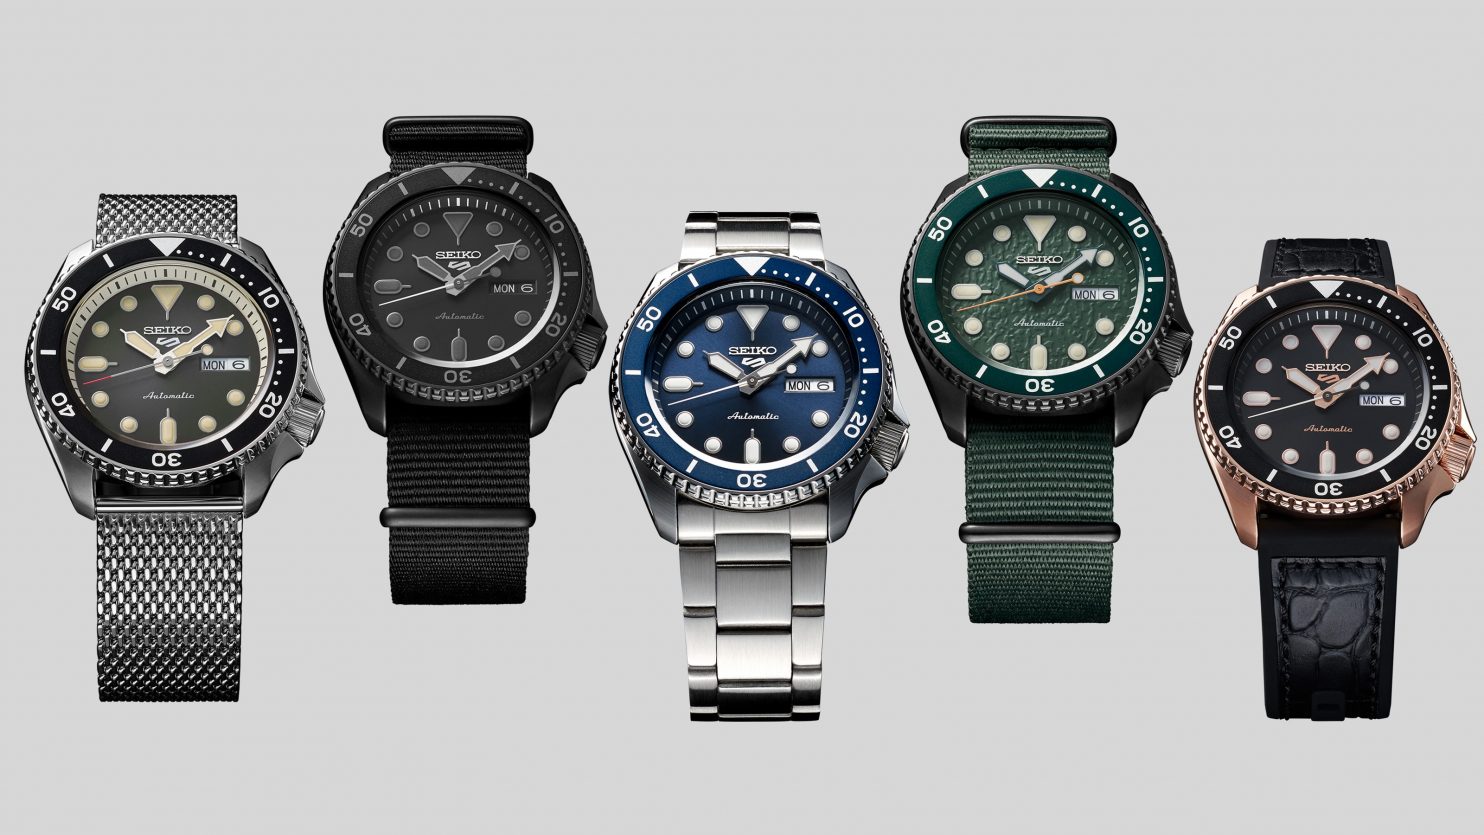 The Successor - What Sets the New SRPD Apart From the SKX Lines of Seiko -  Crystaltimes USA Seiko Modding